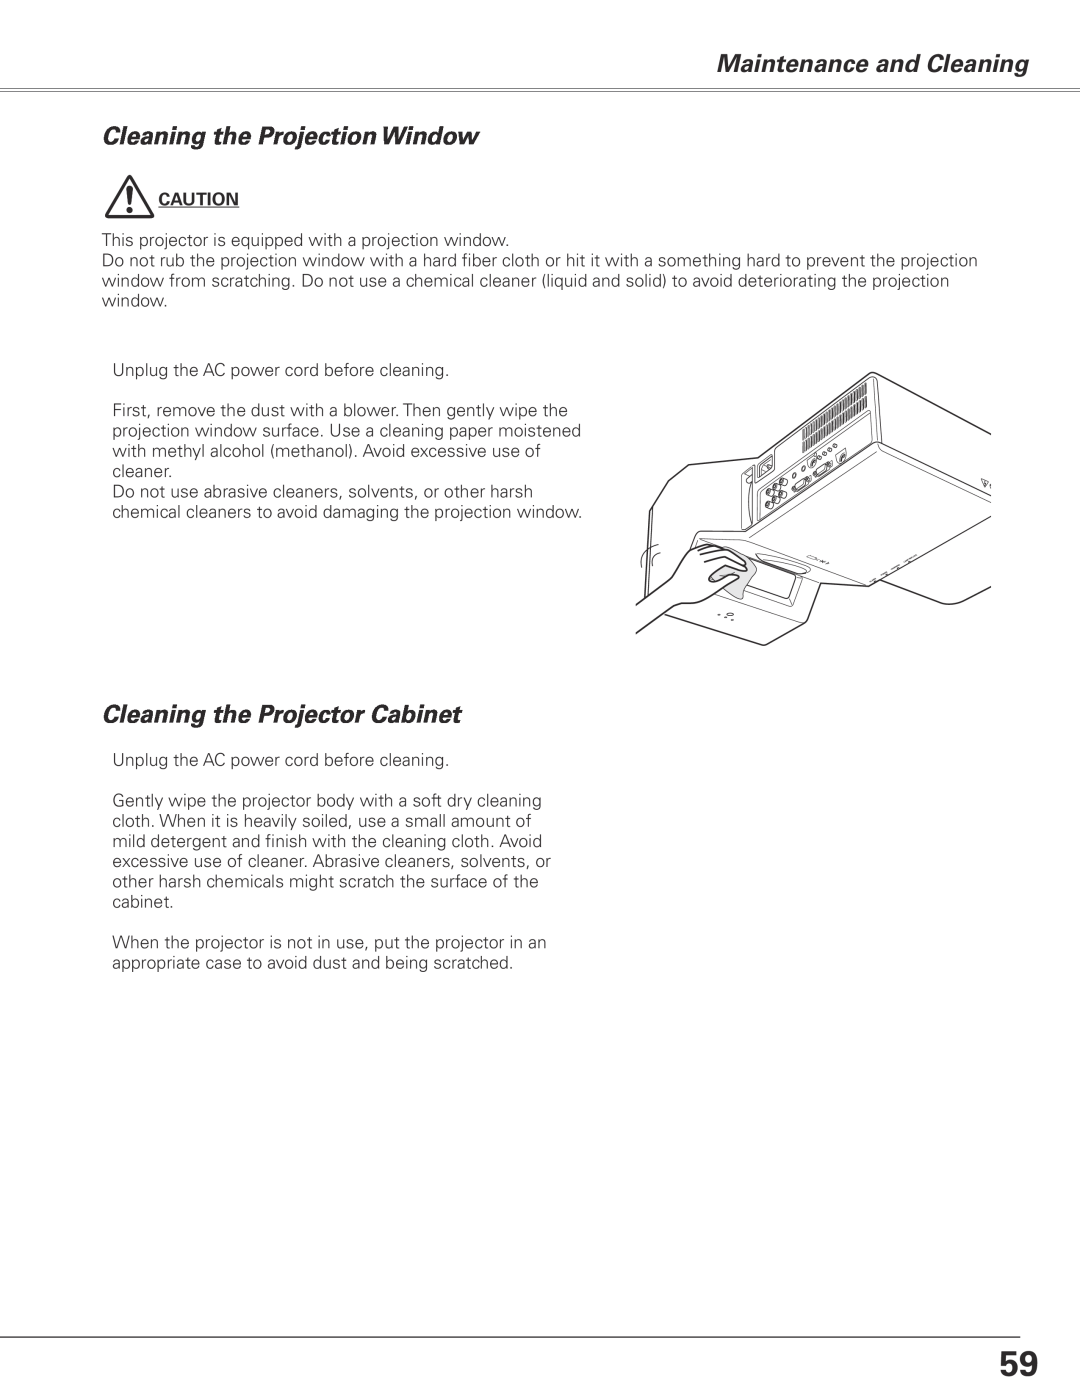 Sanyo PLC-XE50 owner manual Maintenance and Cleaning Cleaning the Projection Window, Cleaning the Projector Cabinet 